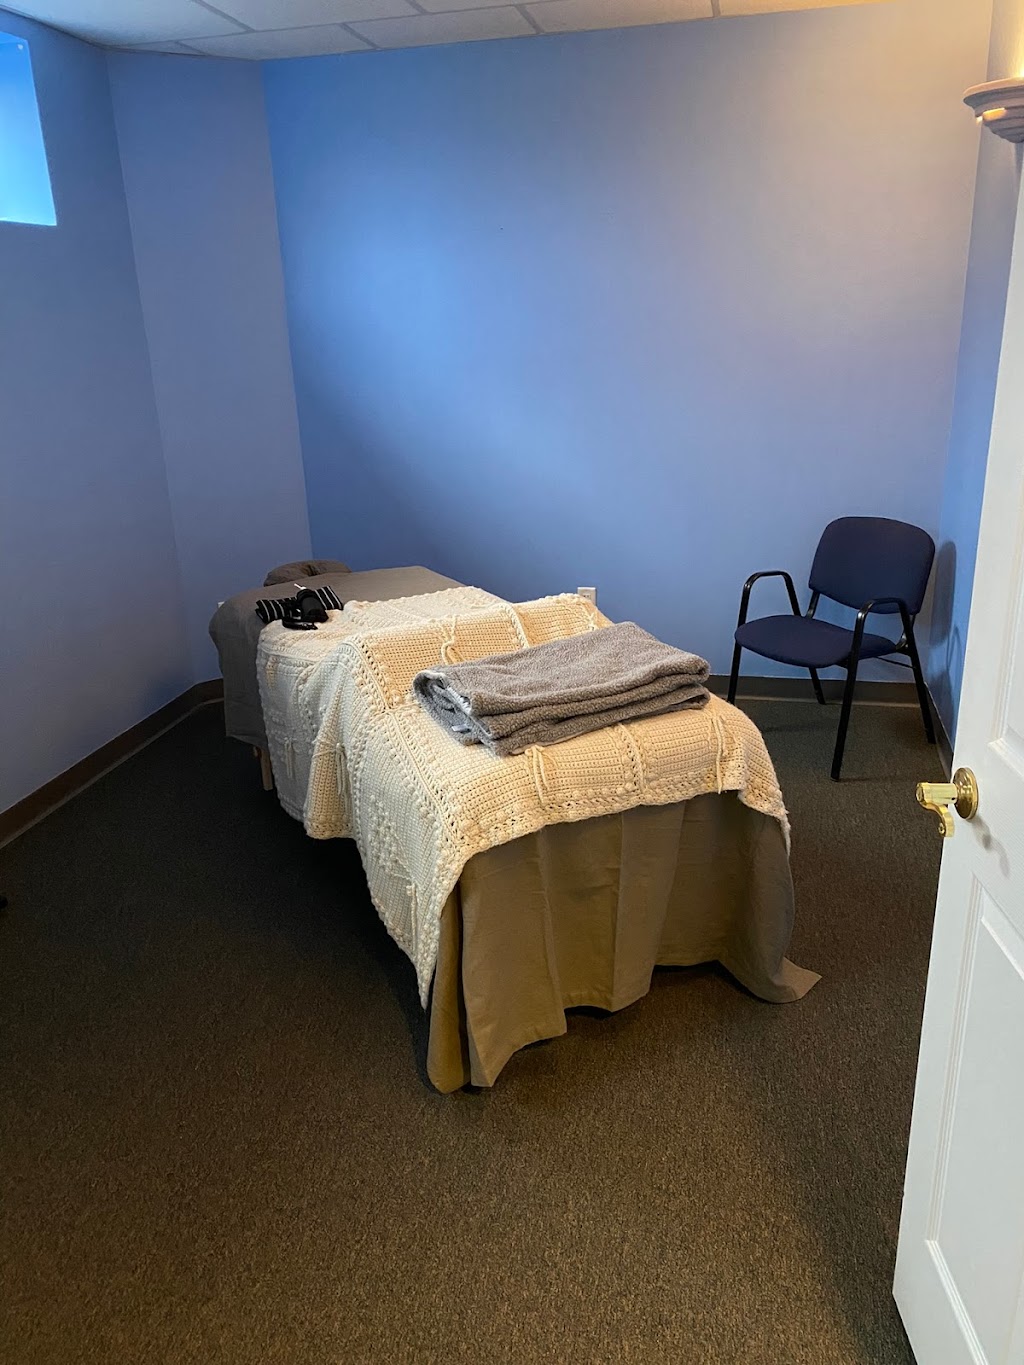 Valley Massage and Hypnotherapy | 384 Main St, Easthampton, MA 01027 | Phone: (413) 853-9366